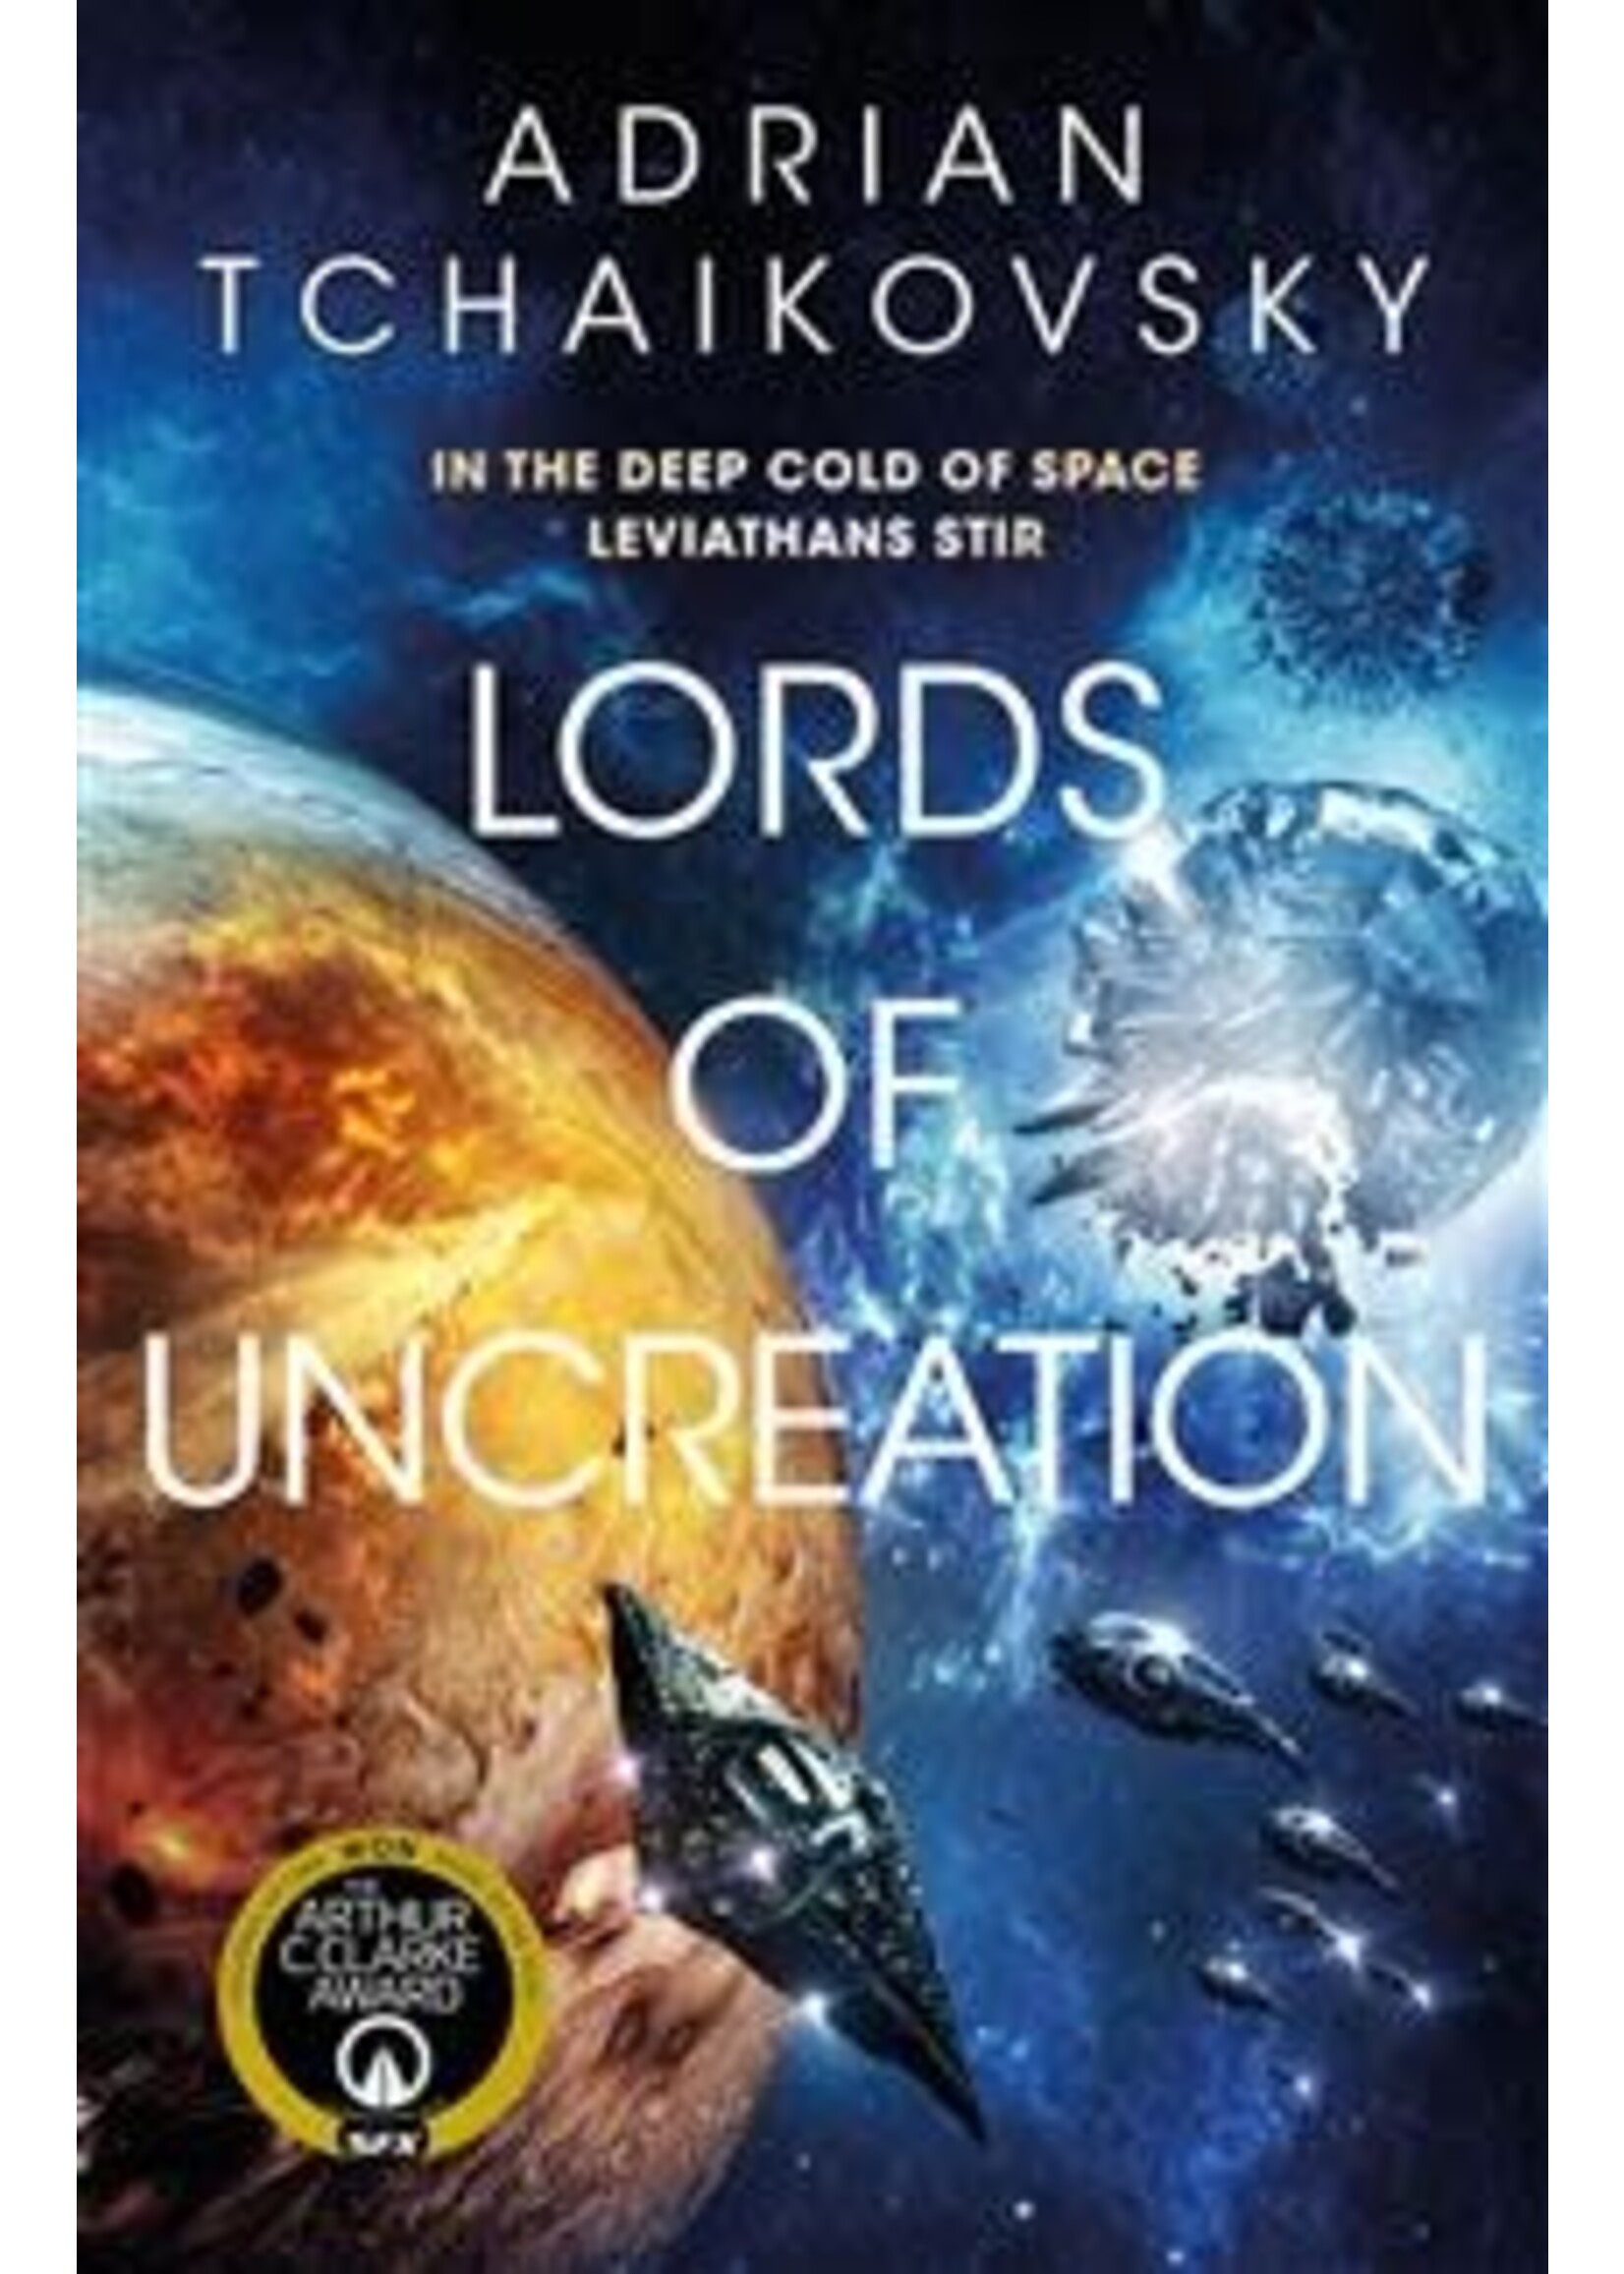 Lords of Uncreation (The Final Architecture #3) by Adrian Tchaikovsky